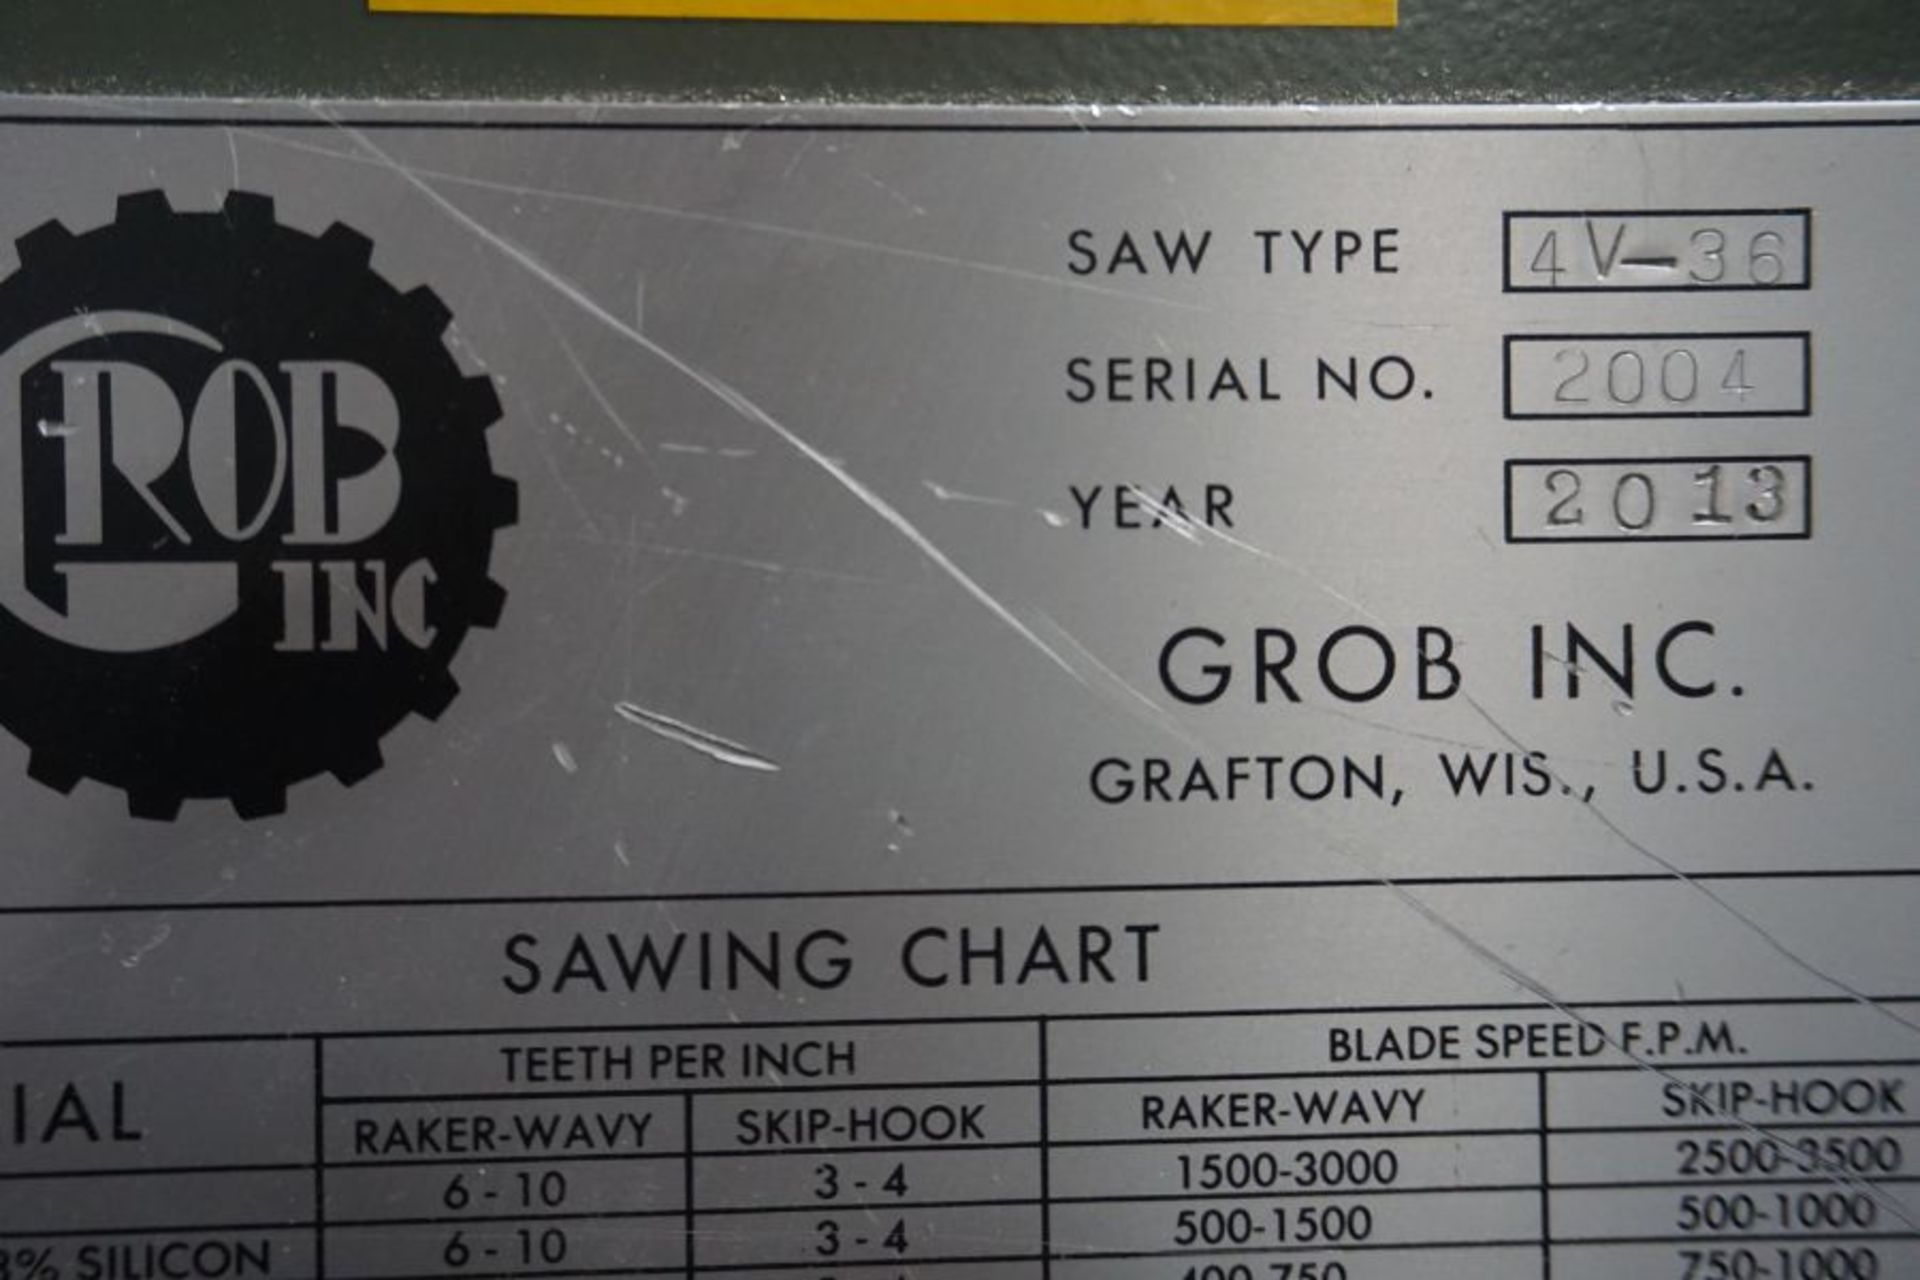 Grob 4V-36 Vertical Band Saw, s/n 2004, New 2013 - Image 4 of 4